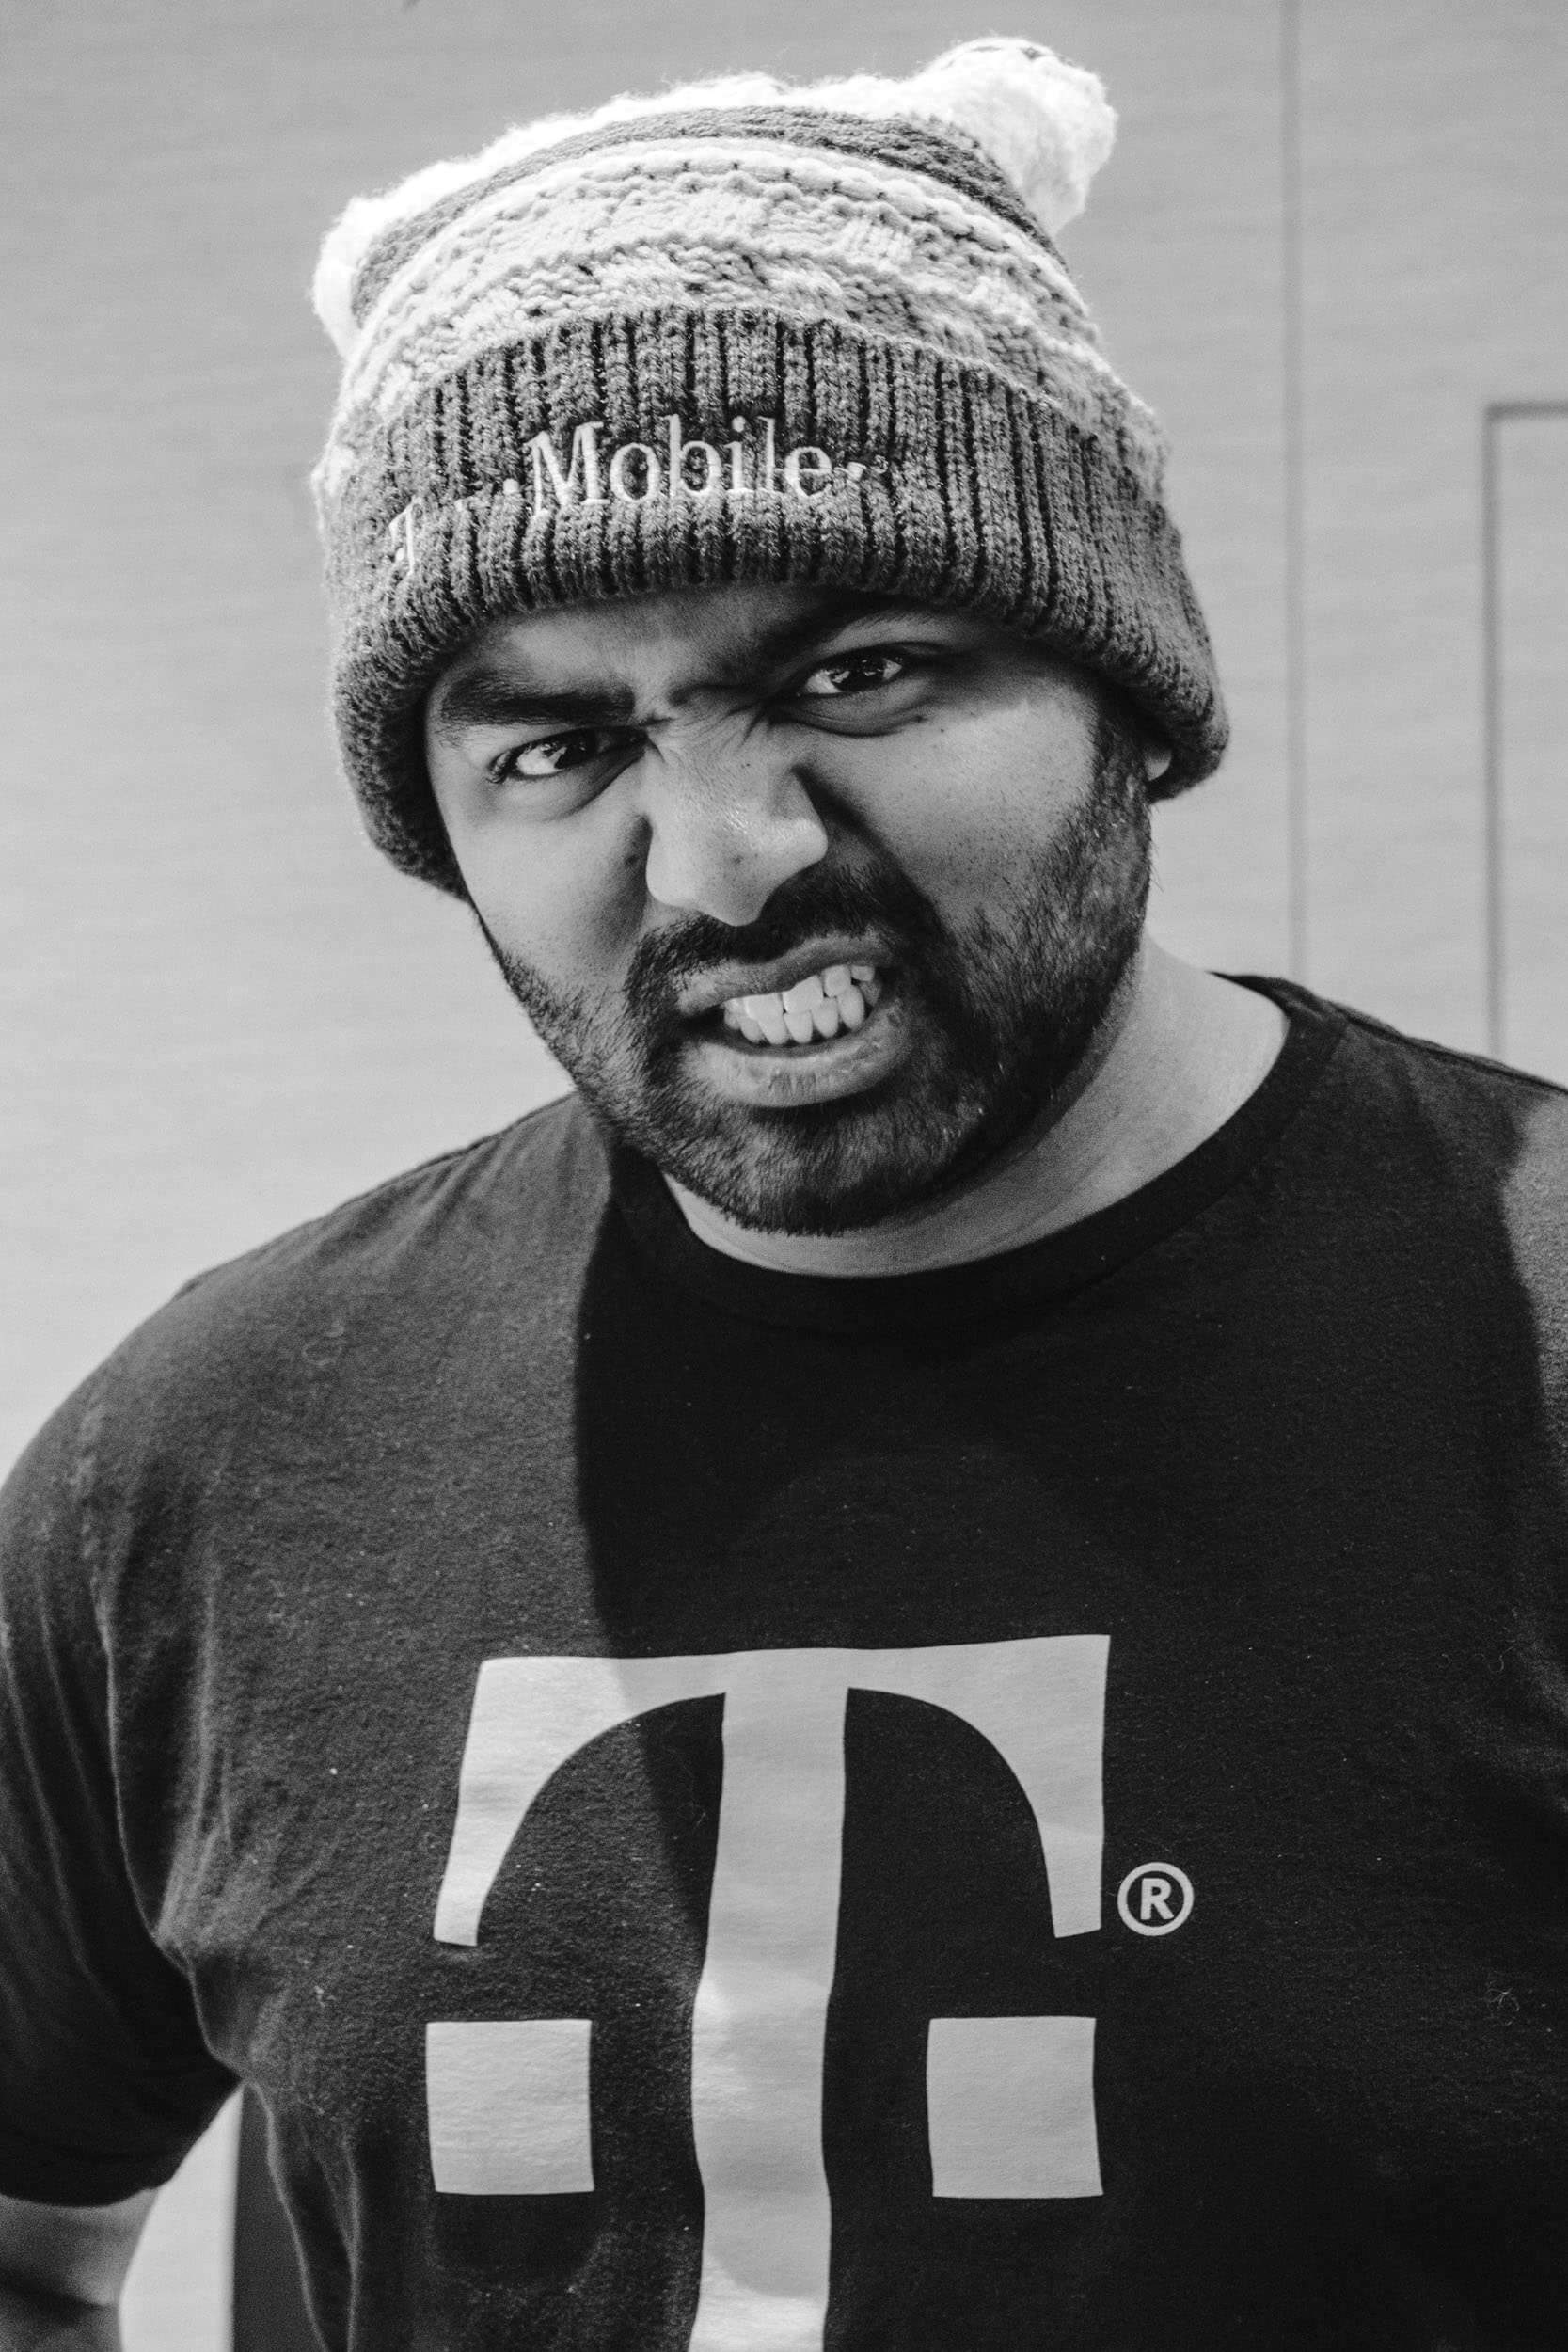 Photograph of a Man growling, wearing a T-Mobile hat and T-Shirt